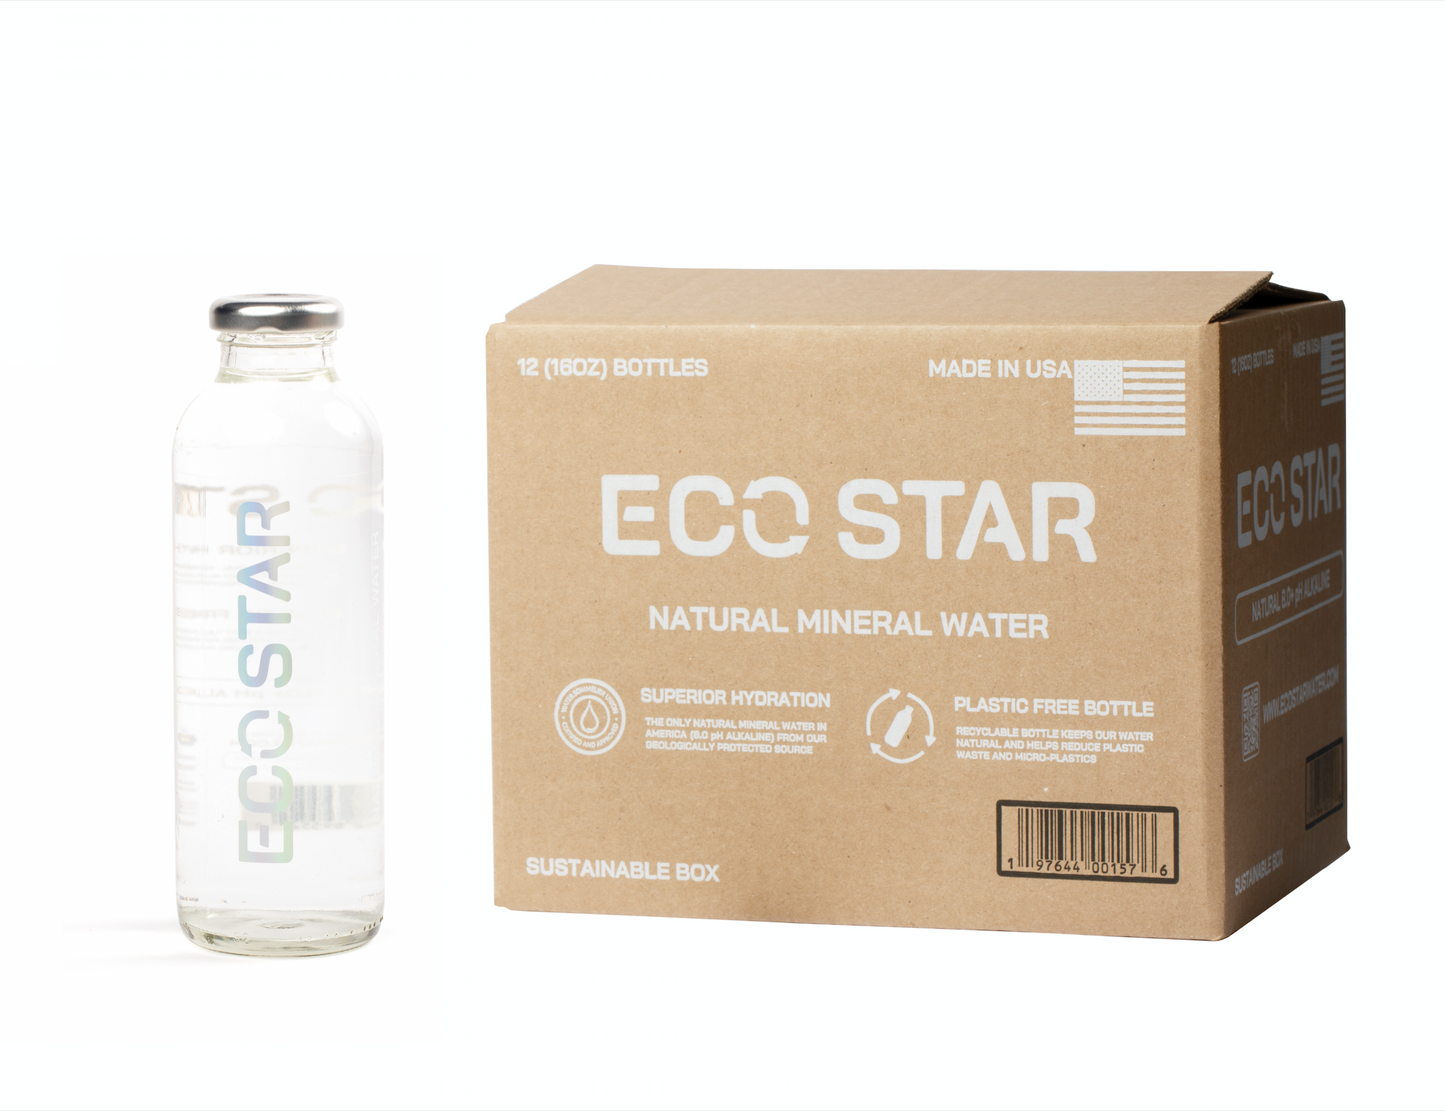 Eco Star Natural Mineral Water